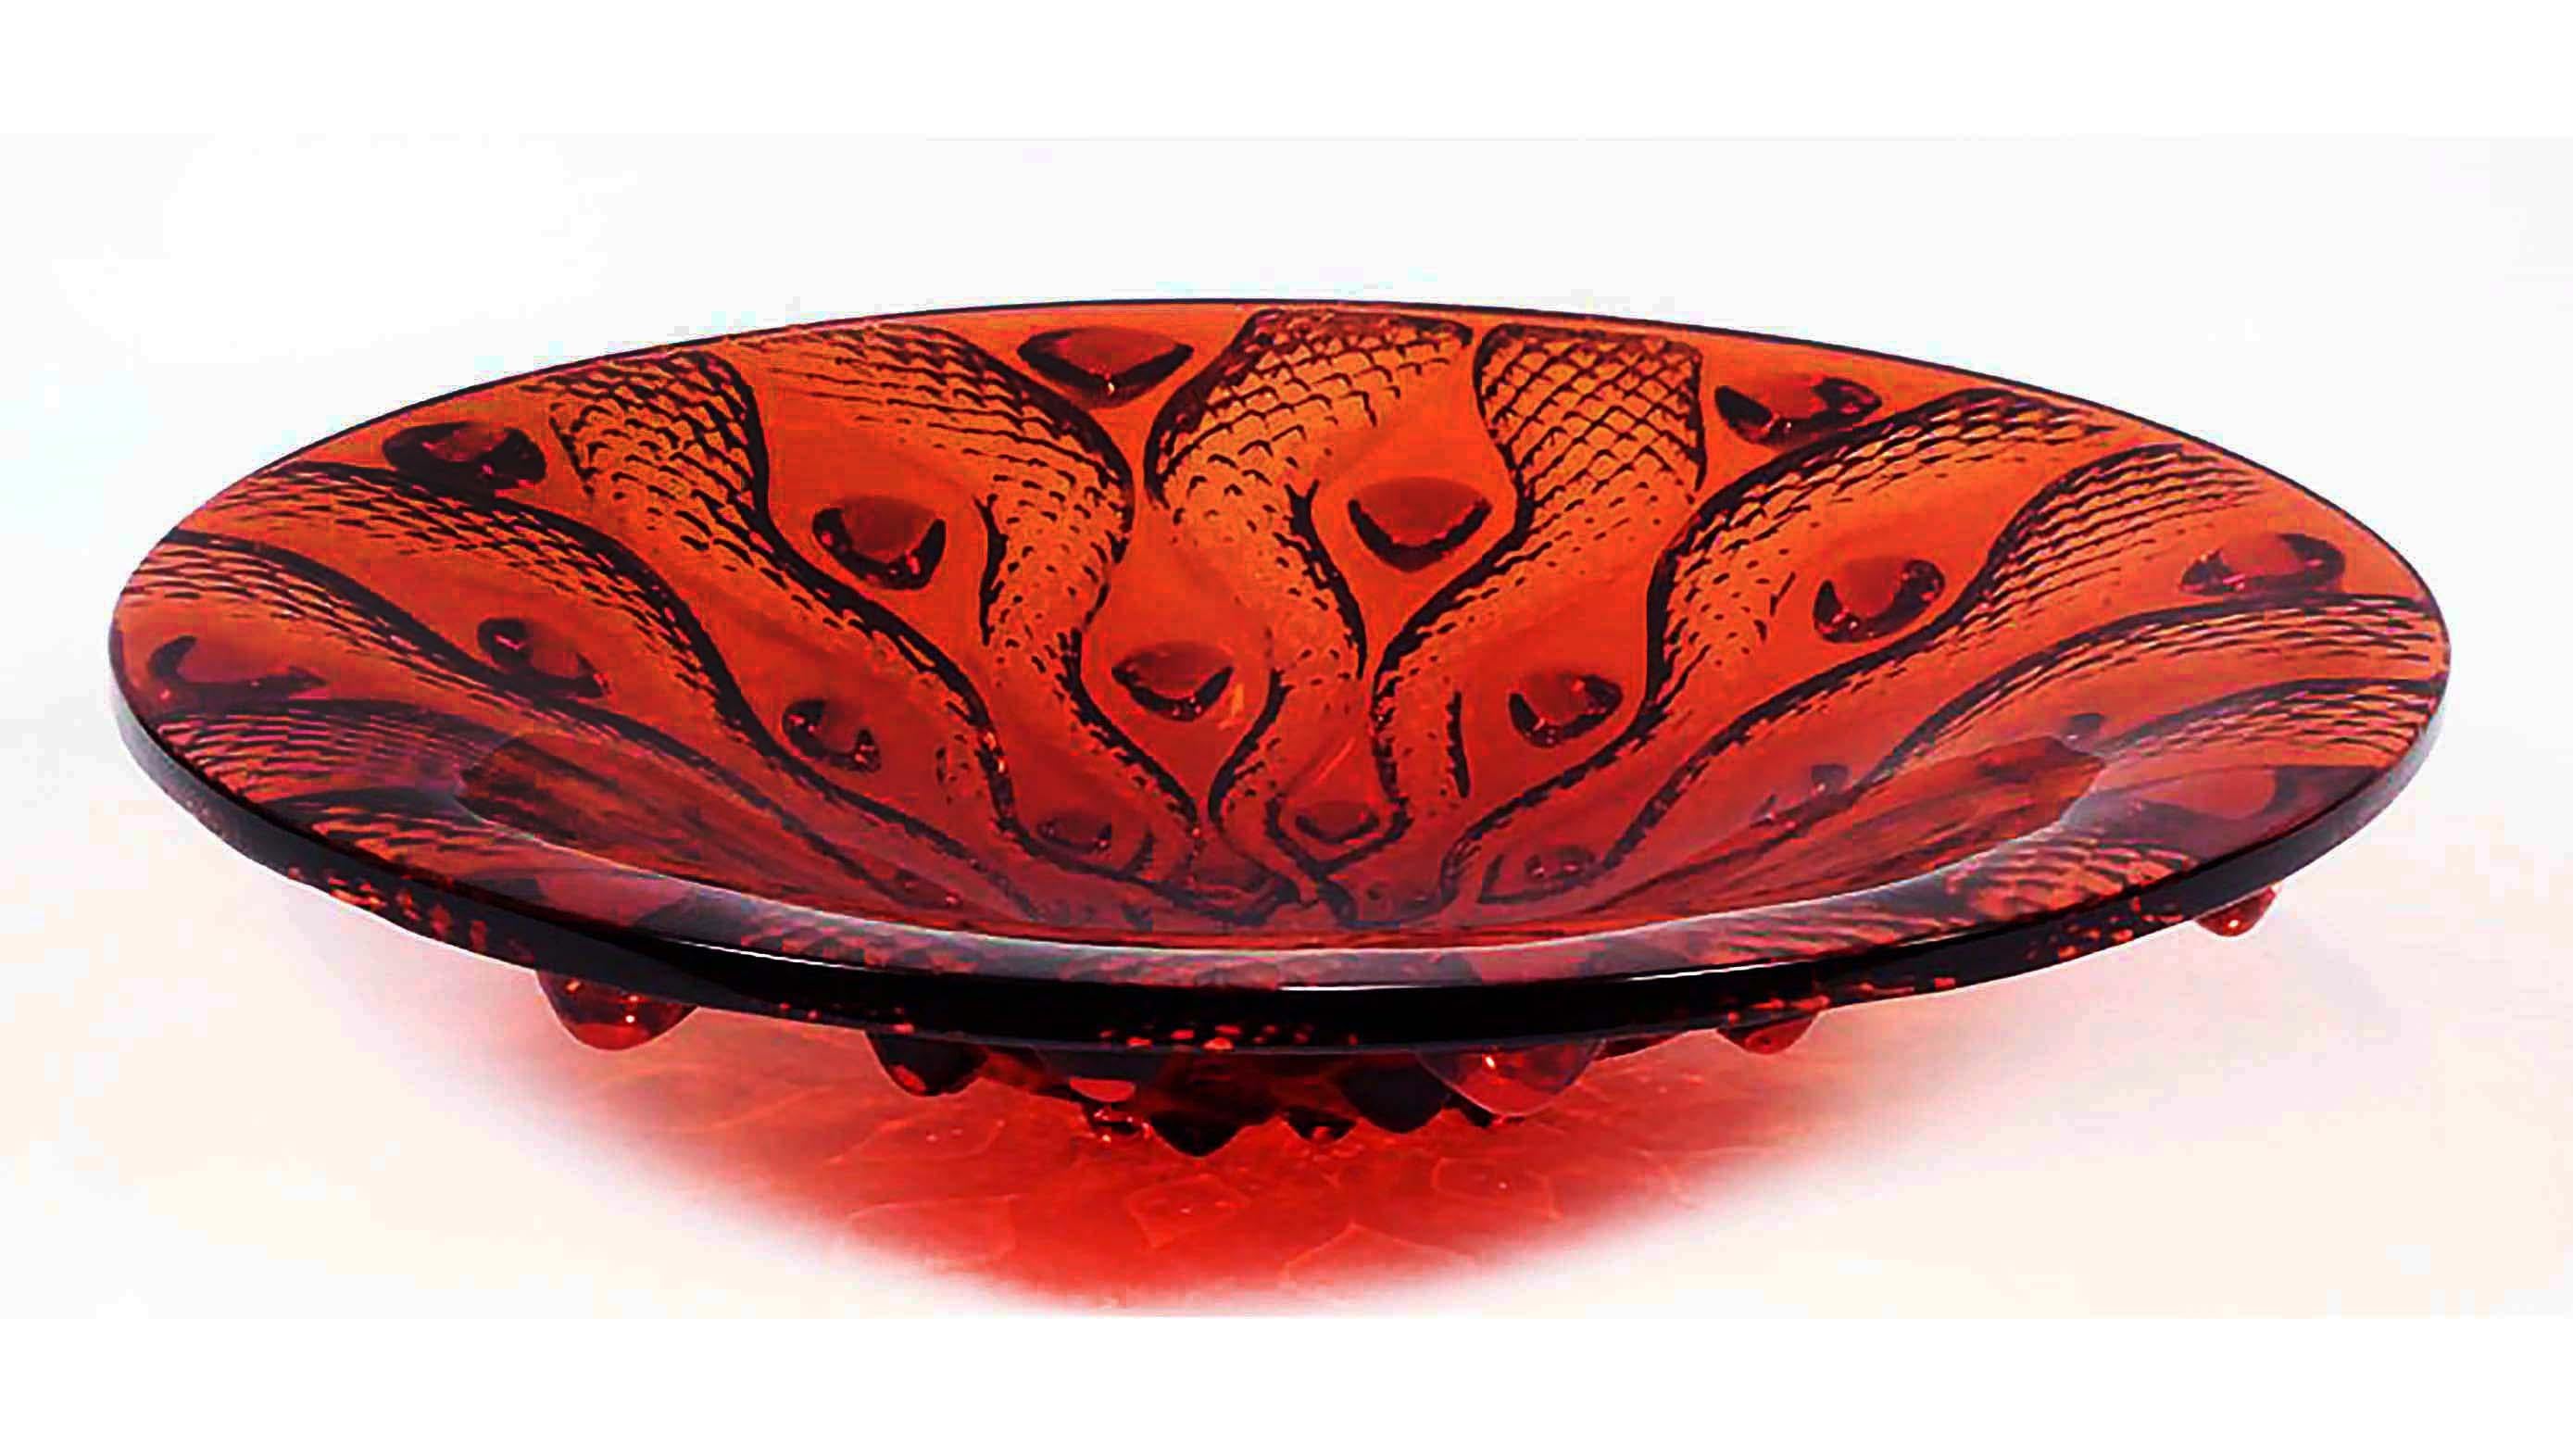 Lalique France red crystal serpentine centerpiece bowl in the box

Offered for sale is a large 20th century Lalique 